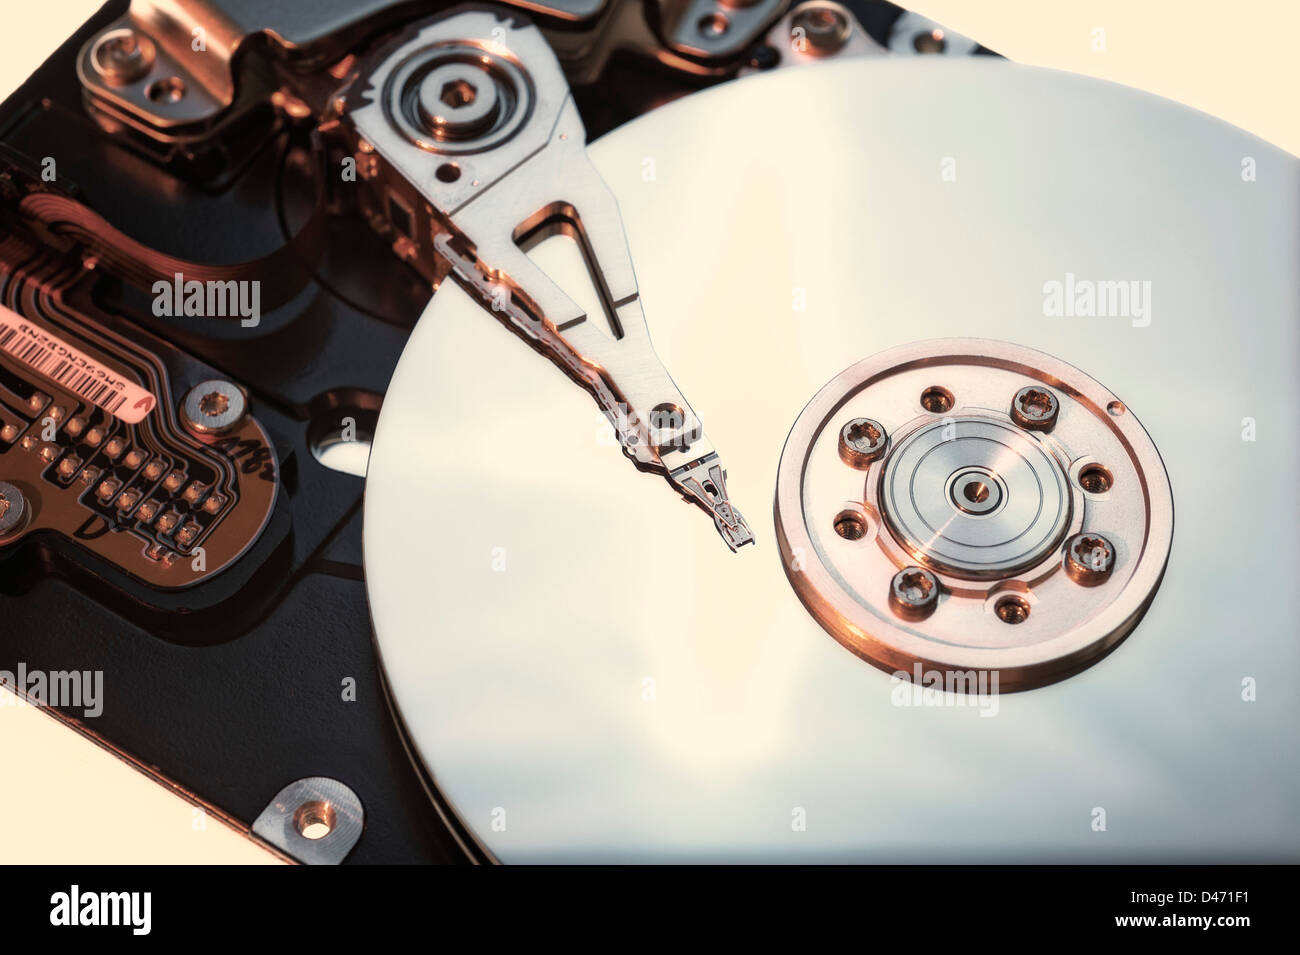 Computer Hard Disk Drive on white Stock Photo